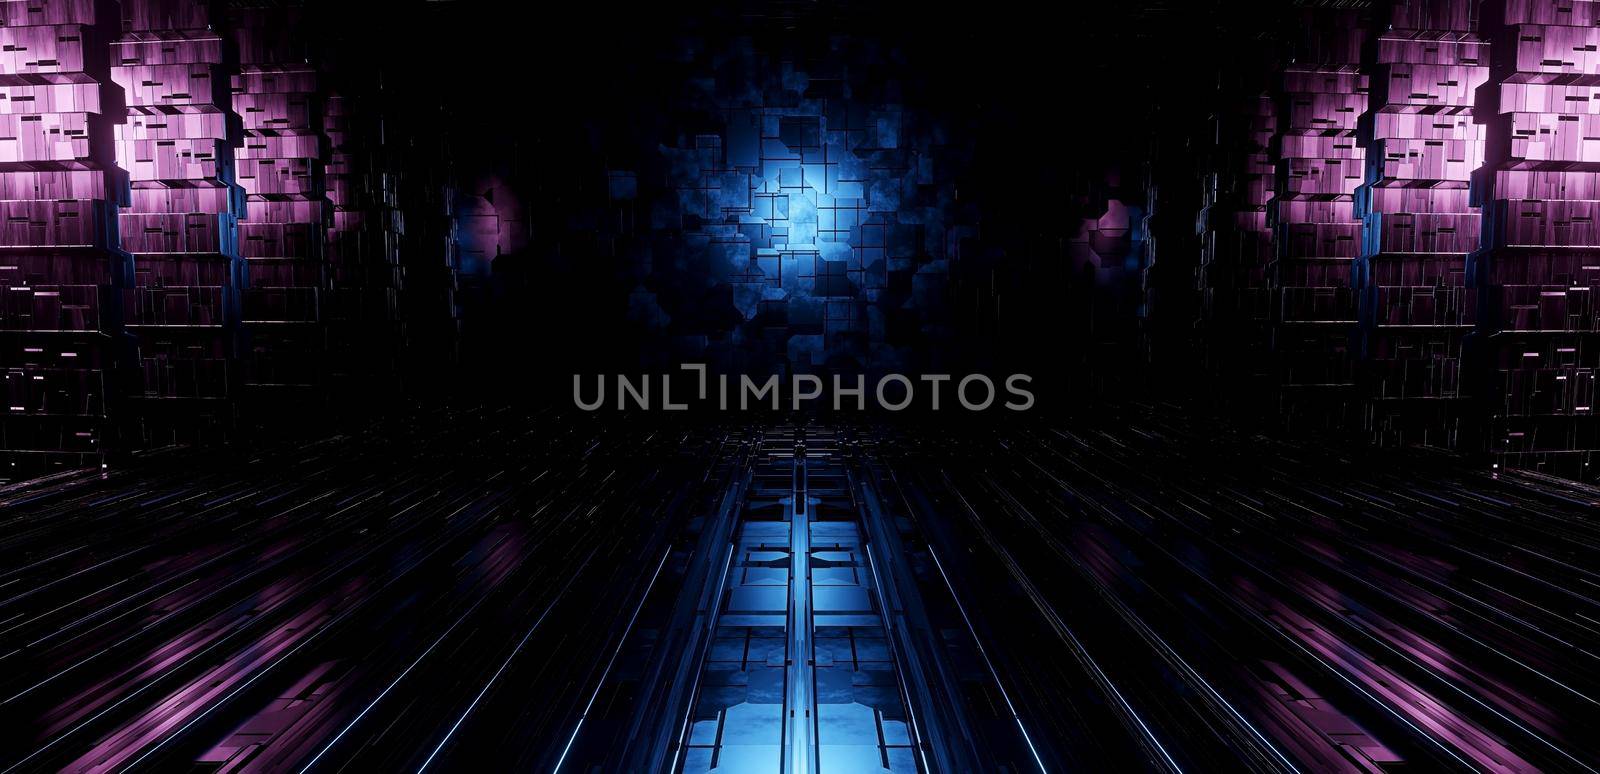 Empty Futuristic Metallic Pillars And Floor Dark Black Illustrative Banner Background Wallpaper Space Age Concept For Product Backgrounds Presentation 3D Rendering